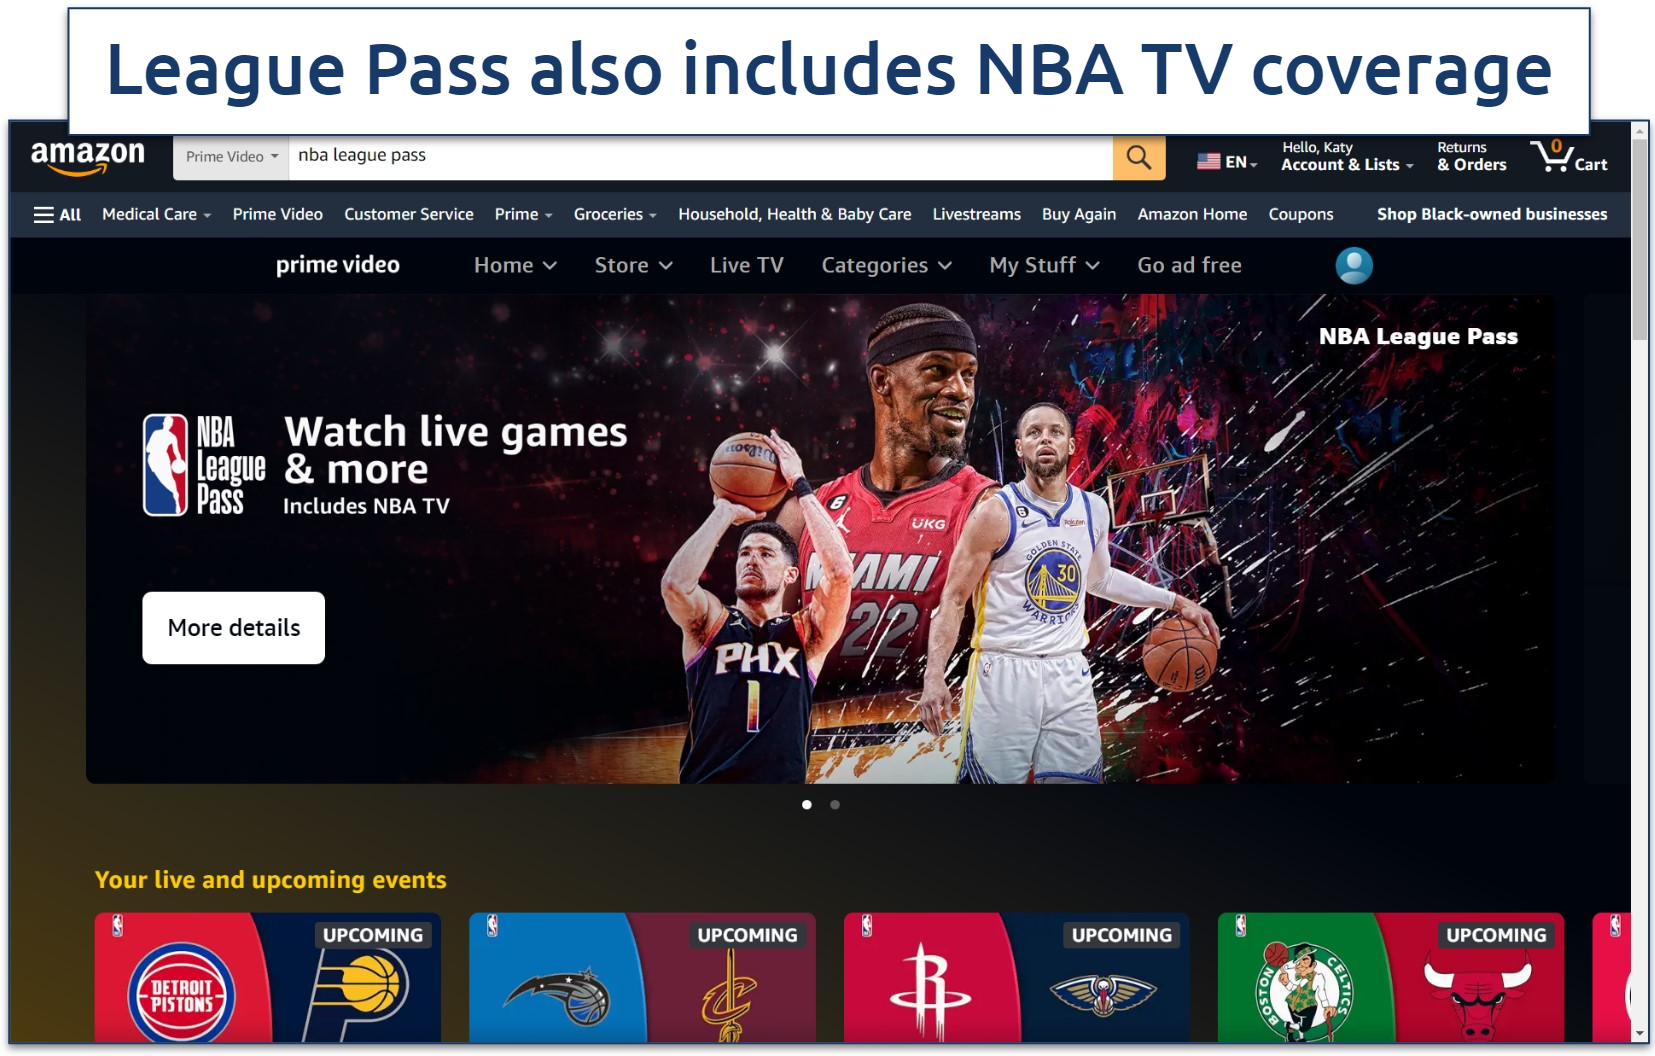 A screenshot of the NBA League Pass channel on Amazon Prime video.